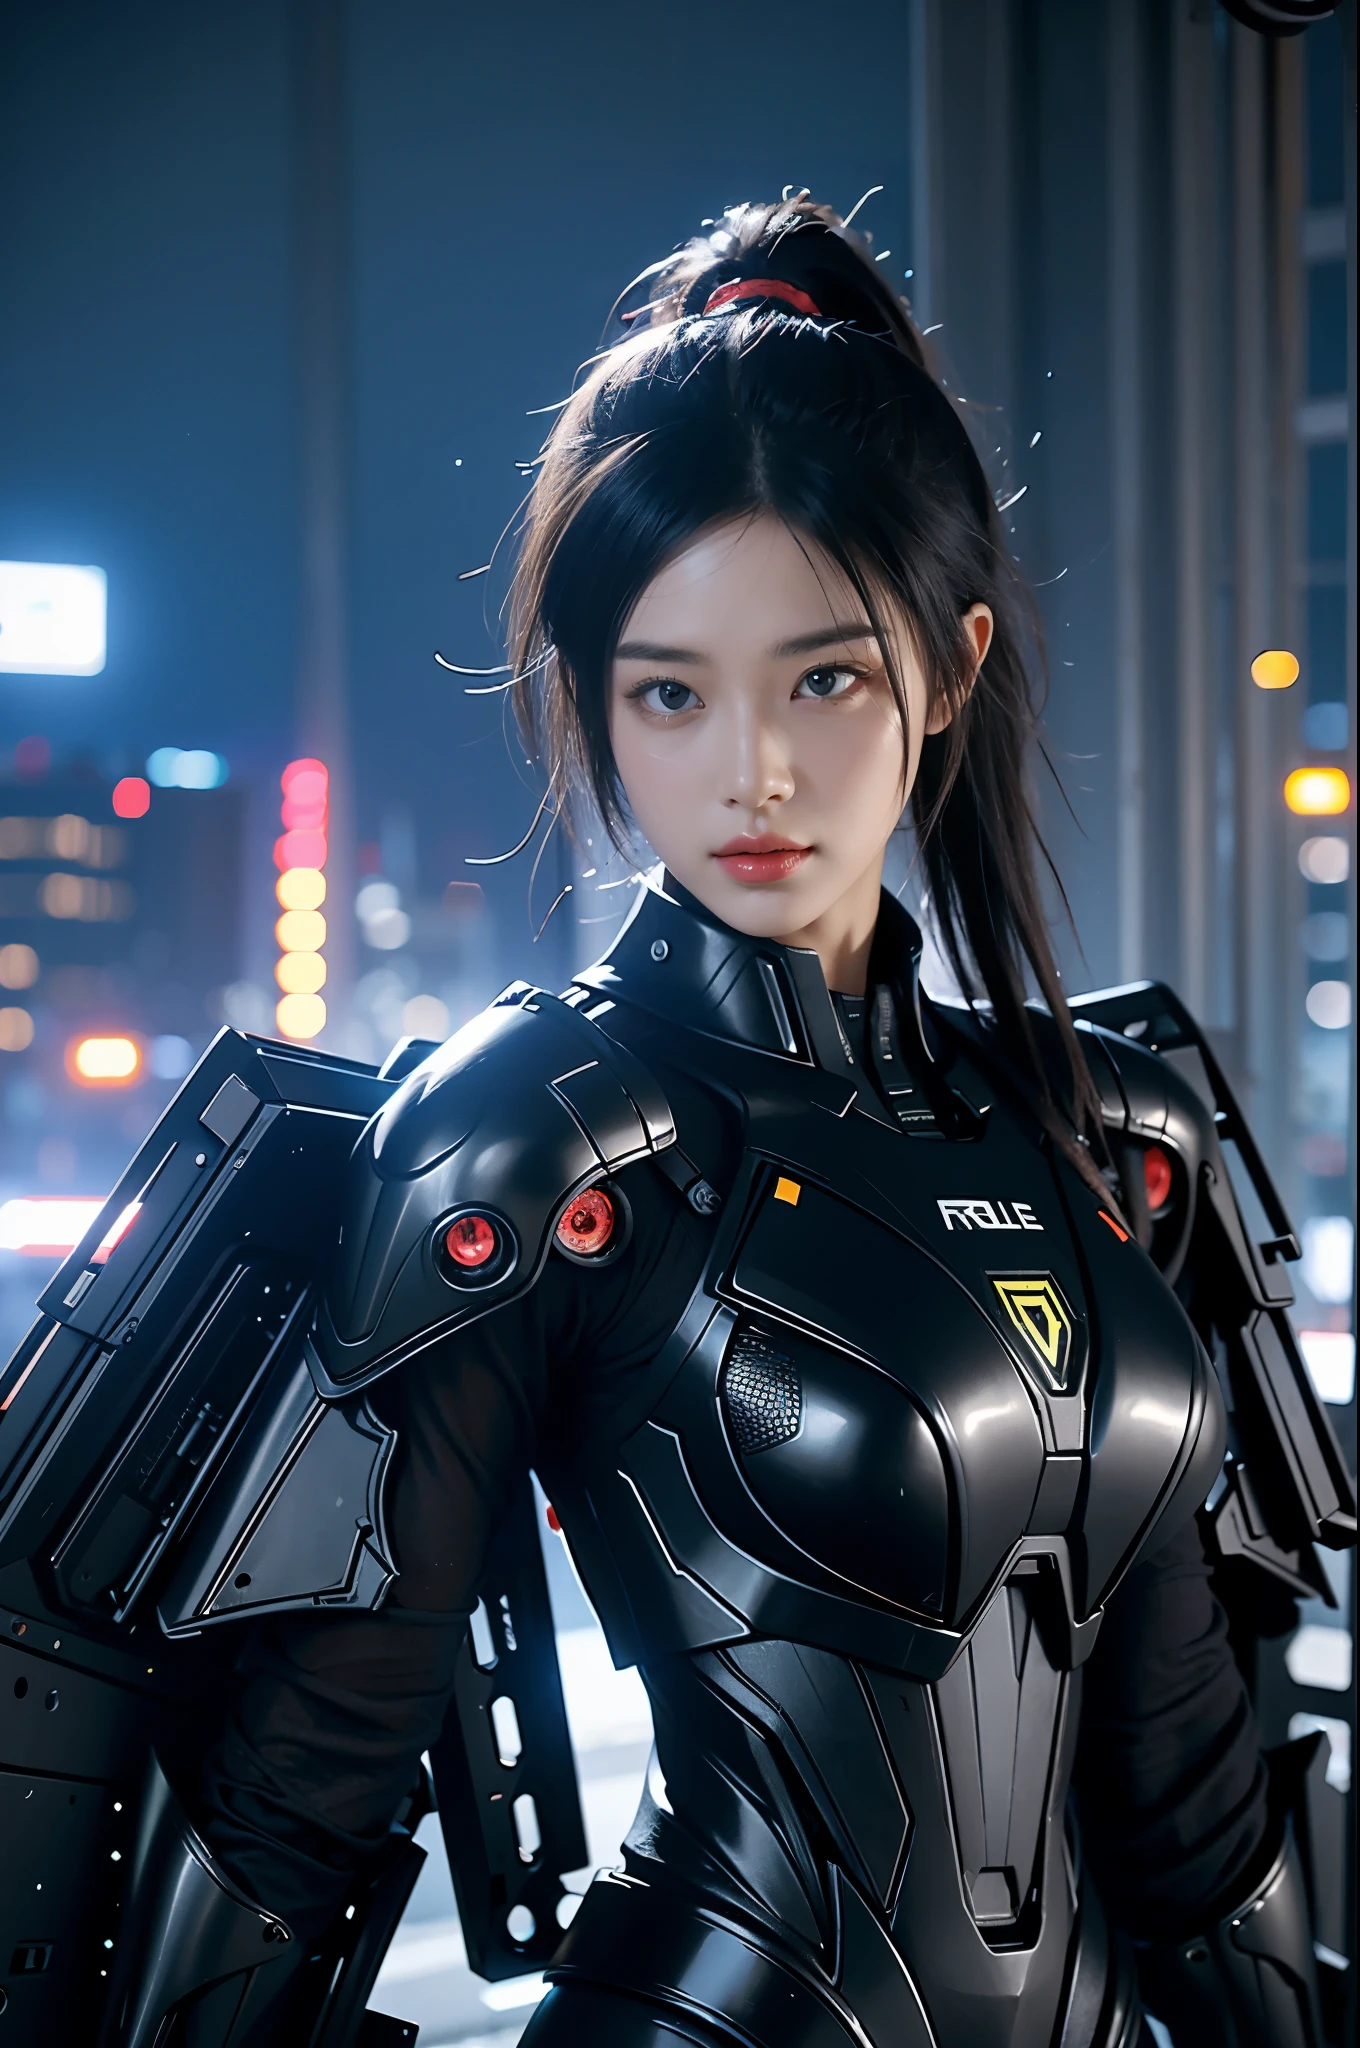 game art，best picture quality，Highest resolution，8k，((A half-length photo))，((portrait))，(rule of thirds)，Unreal Engine 5 rendering works， (Future girl)，(female warrior)， 22-year-old young hacker)，(ancient oriental hairstyle)，(Beautiful eyes full of details)，(big breasts)，(eye shadow)，Elegant and charming，indifferent，((frown))，(Combat suit full of futuristic technology，The costume combines futuristic power armor and，Clothing is decorated with glittering patterns and emblems)，cyberpunk characters，in the style of futuristic， photo poses，city background，lamp，Ray tracing，Game CG，((3D Unreal Engine))，OC rendering reflection pattern